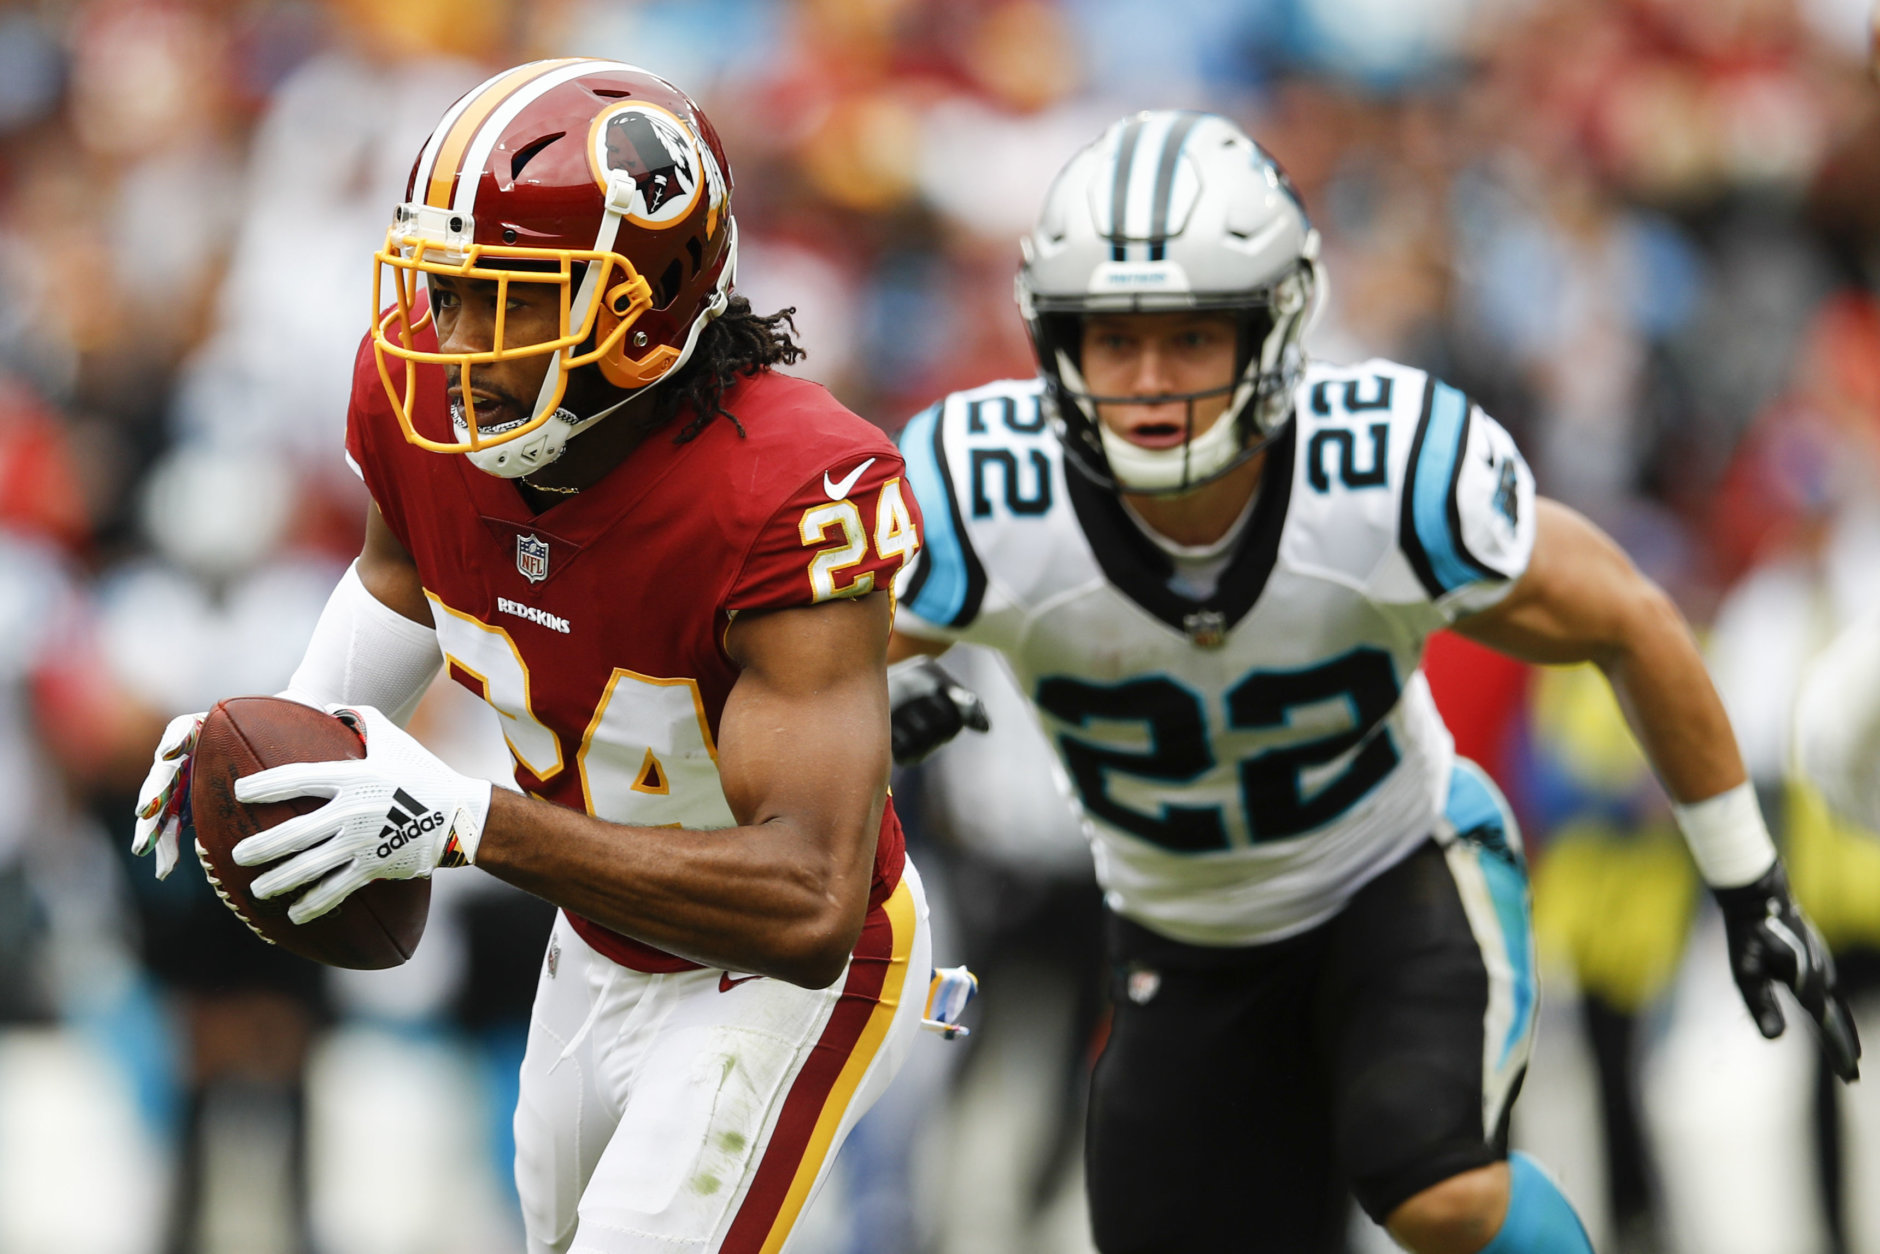 Washington Redskins cornerback Josh Norman (24) carries the ball after pulling in an interception as Carolina Panthers running back Christian McCaffrey (22) pursues him during the first half of an NFL football game, Sunday, Oct. 14, 2018, in Landover, Md. (AP Photo/Patrick Semansky)